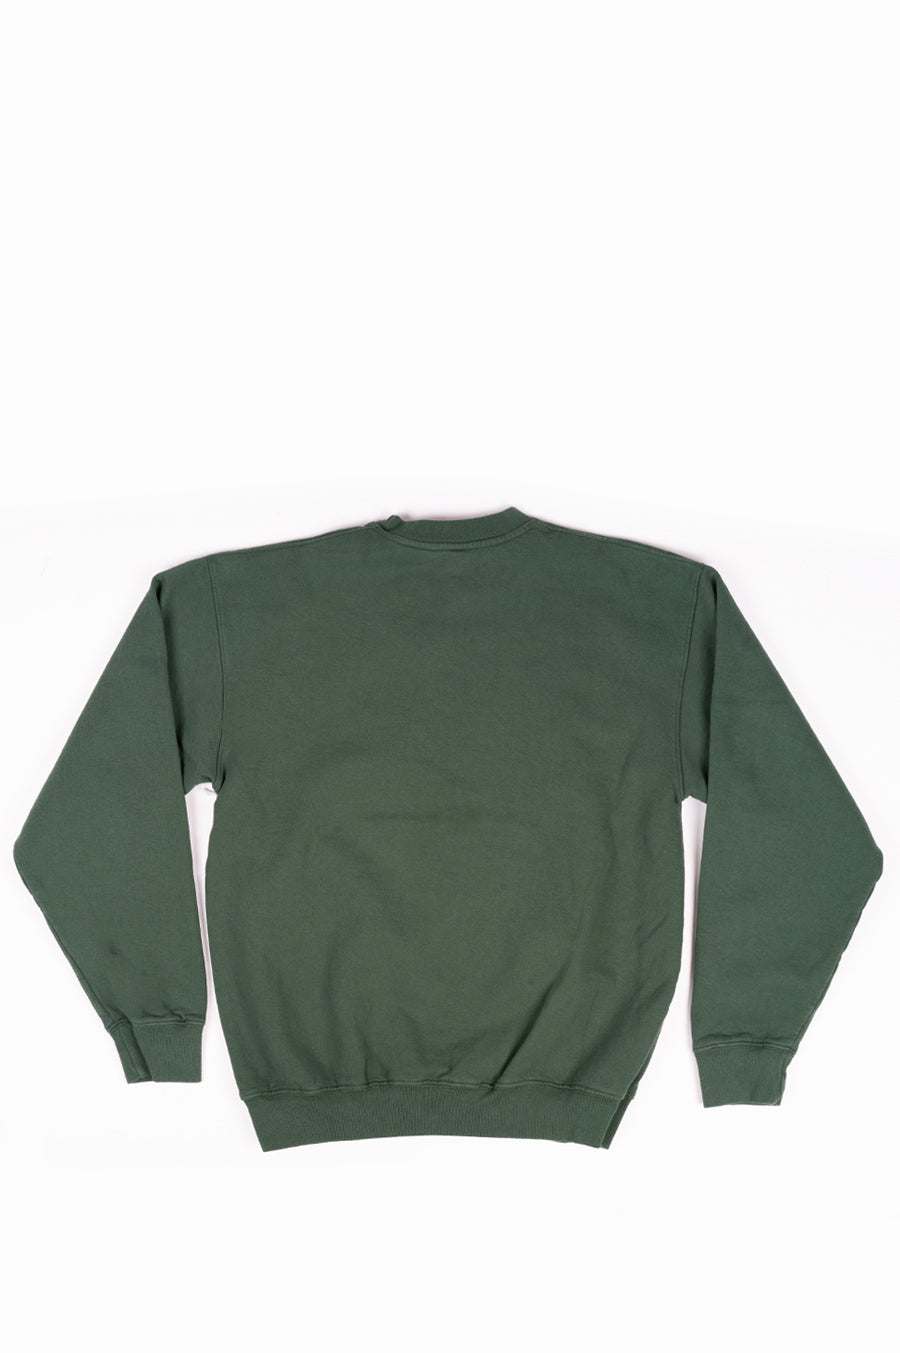 SPORTY AND RICH HEALTH & WELLNESS CREWNECK FOREST GREEN – BLENDS